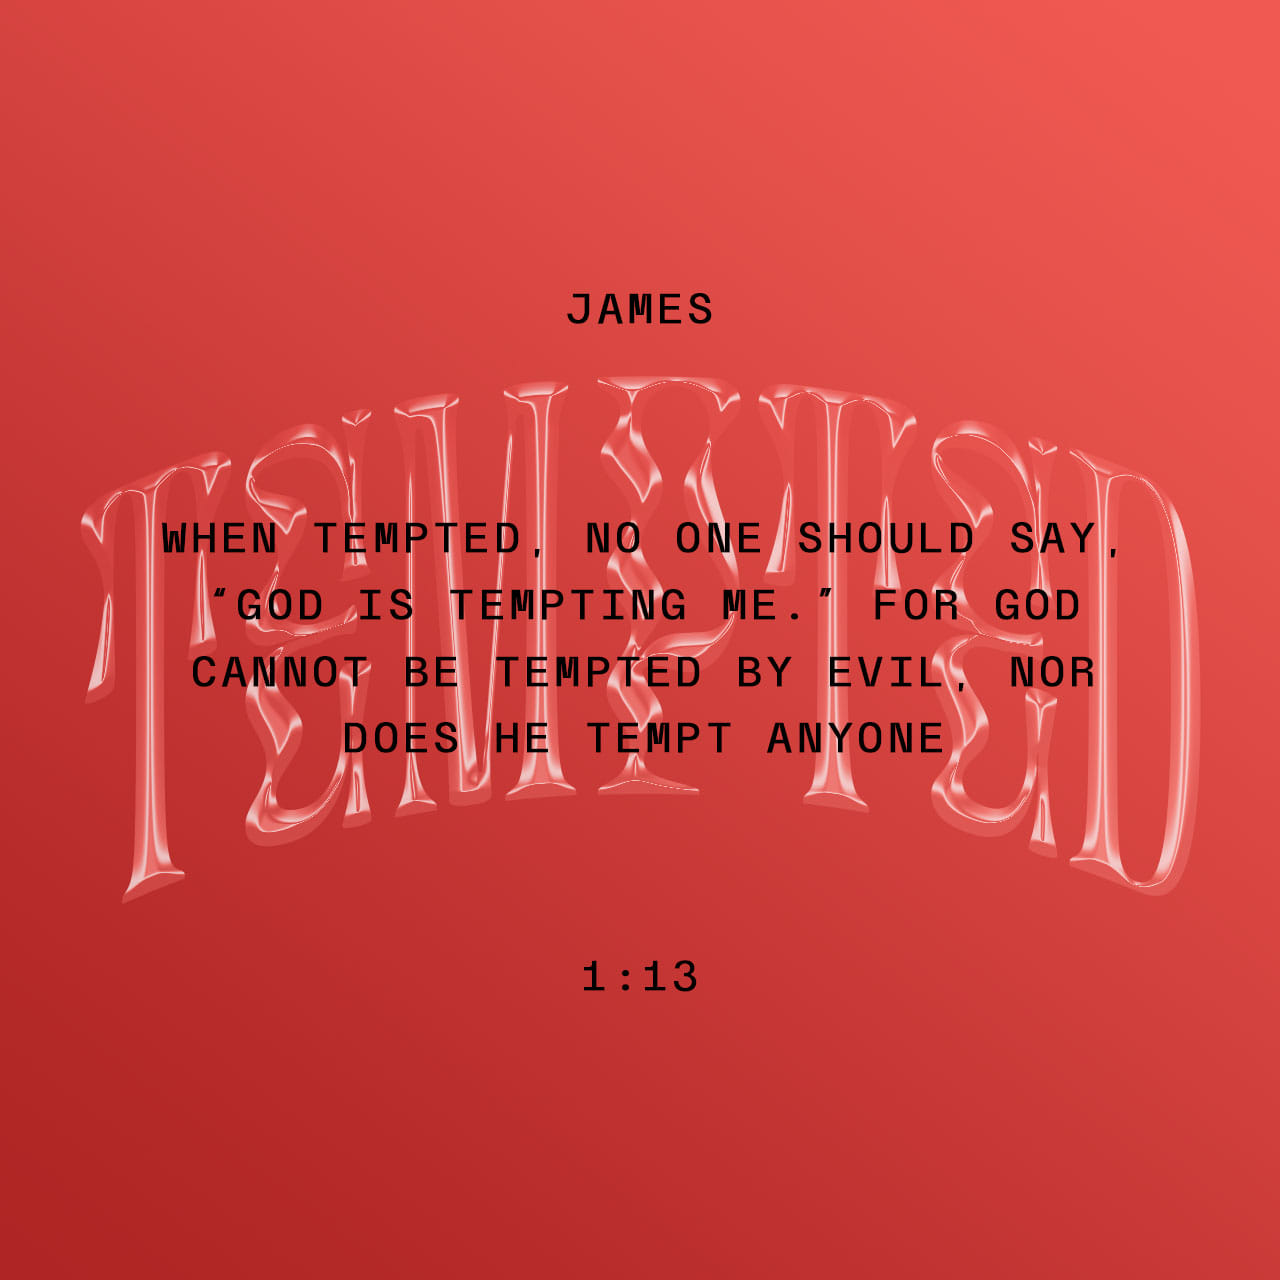 James 1:13-14 When tempted, no one should say, “God is tempting me.” For  God cannot be tempted by evil, nor does he tempt anyone; but each person is  tempted when they are